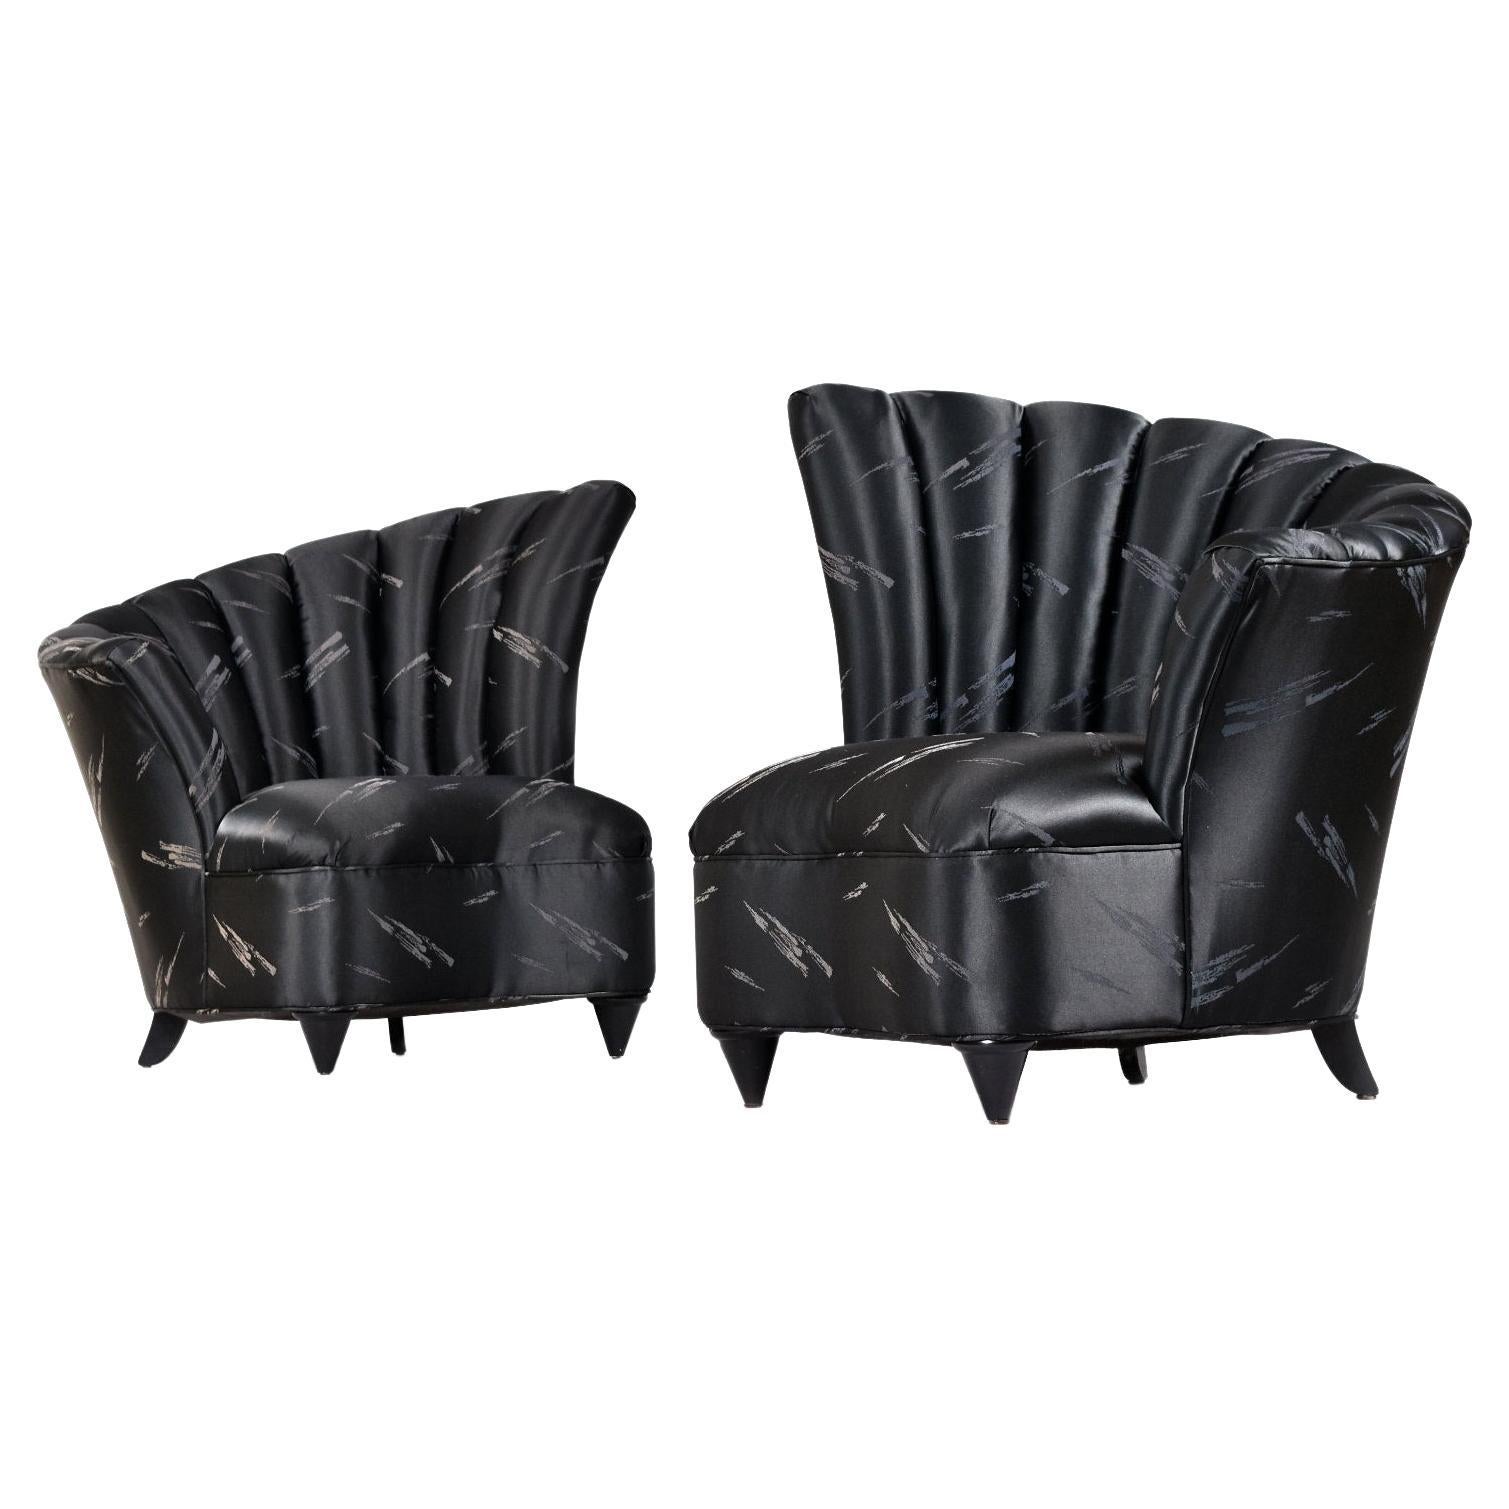 Pair of 1980s Neo-Deco Style Black Satin Scallop Fan Back Slipper Chairs